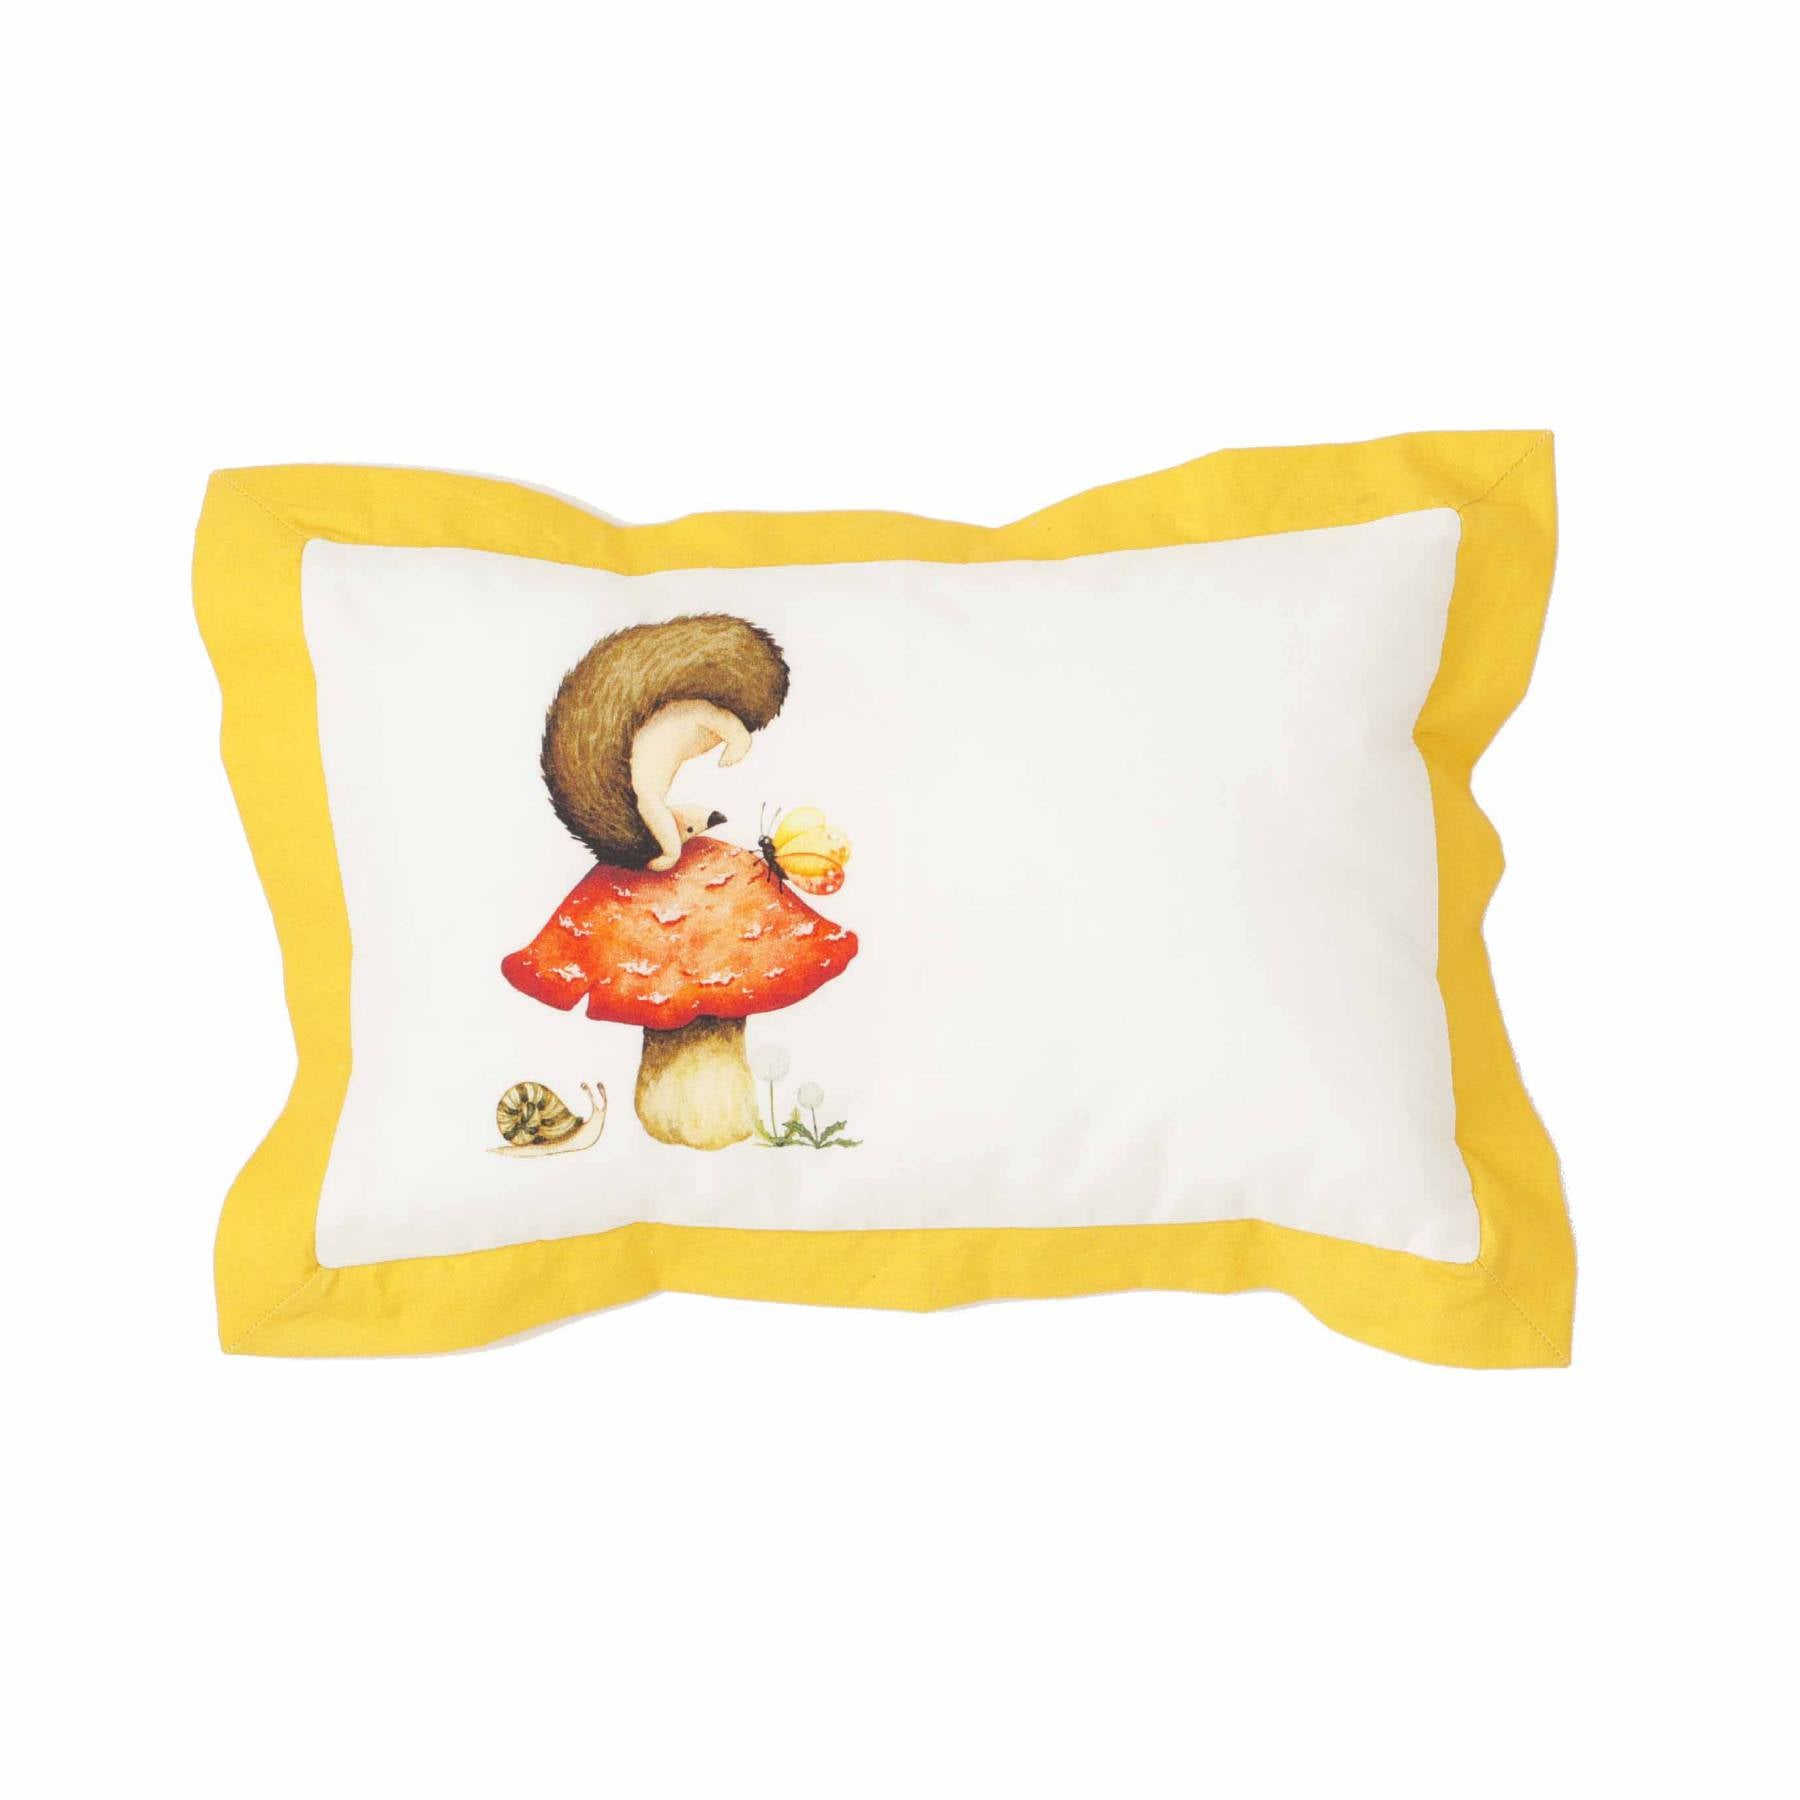 Hoggy the Hedgehog - Baby Pillow